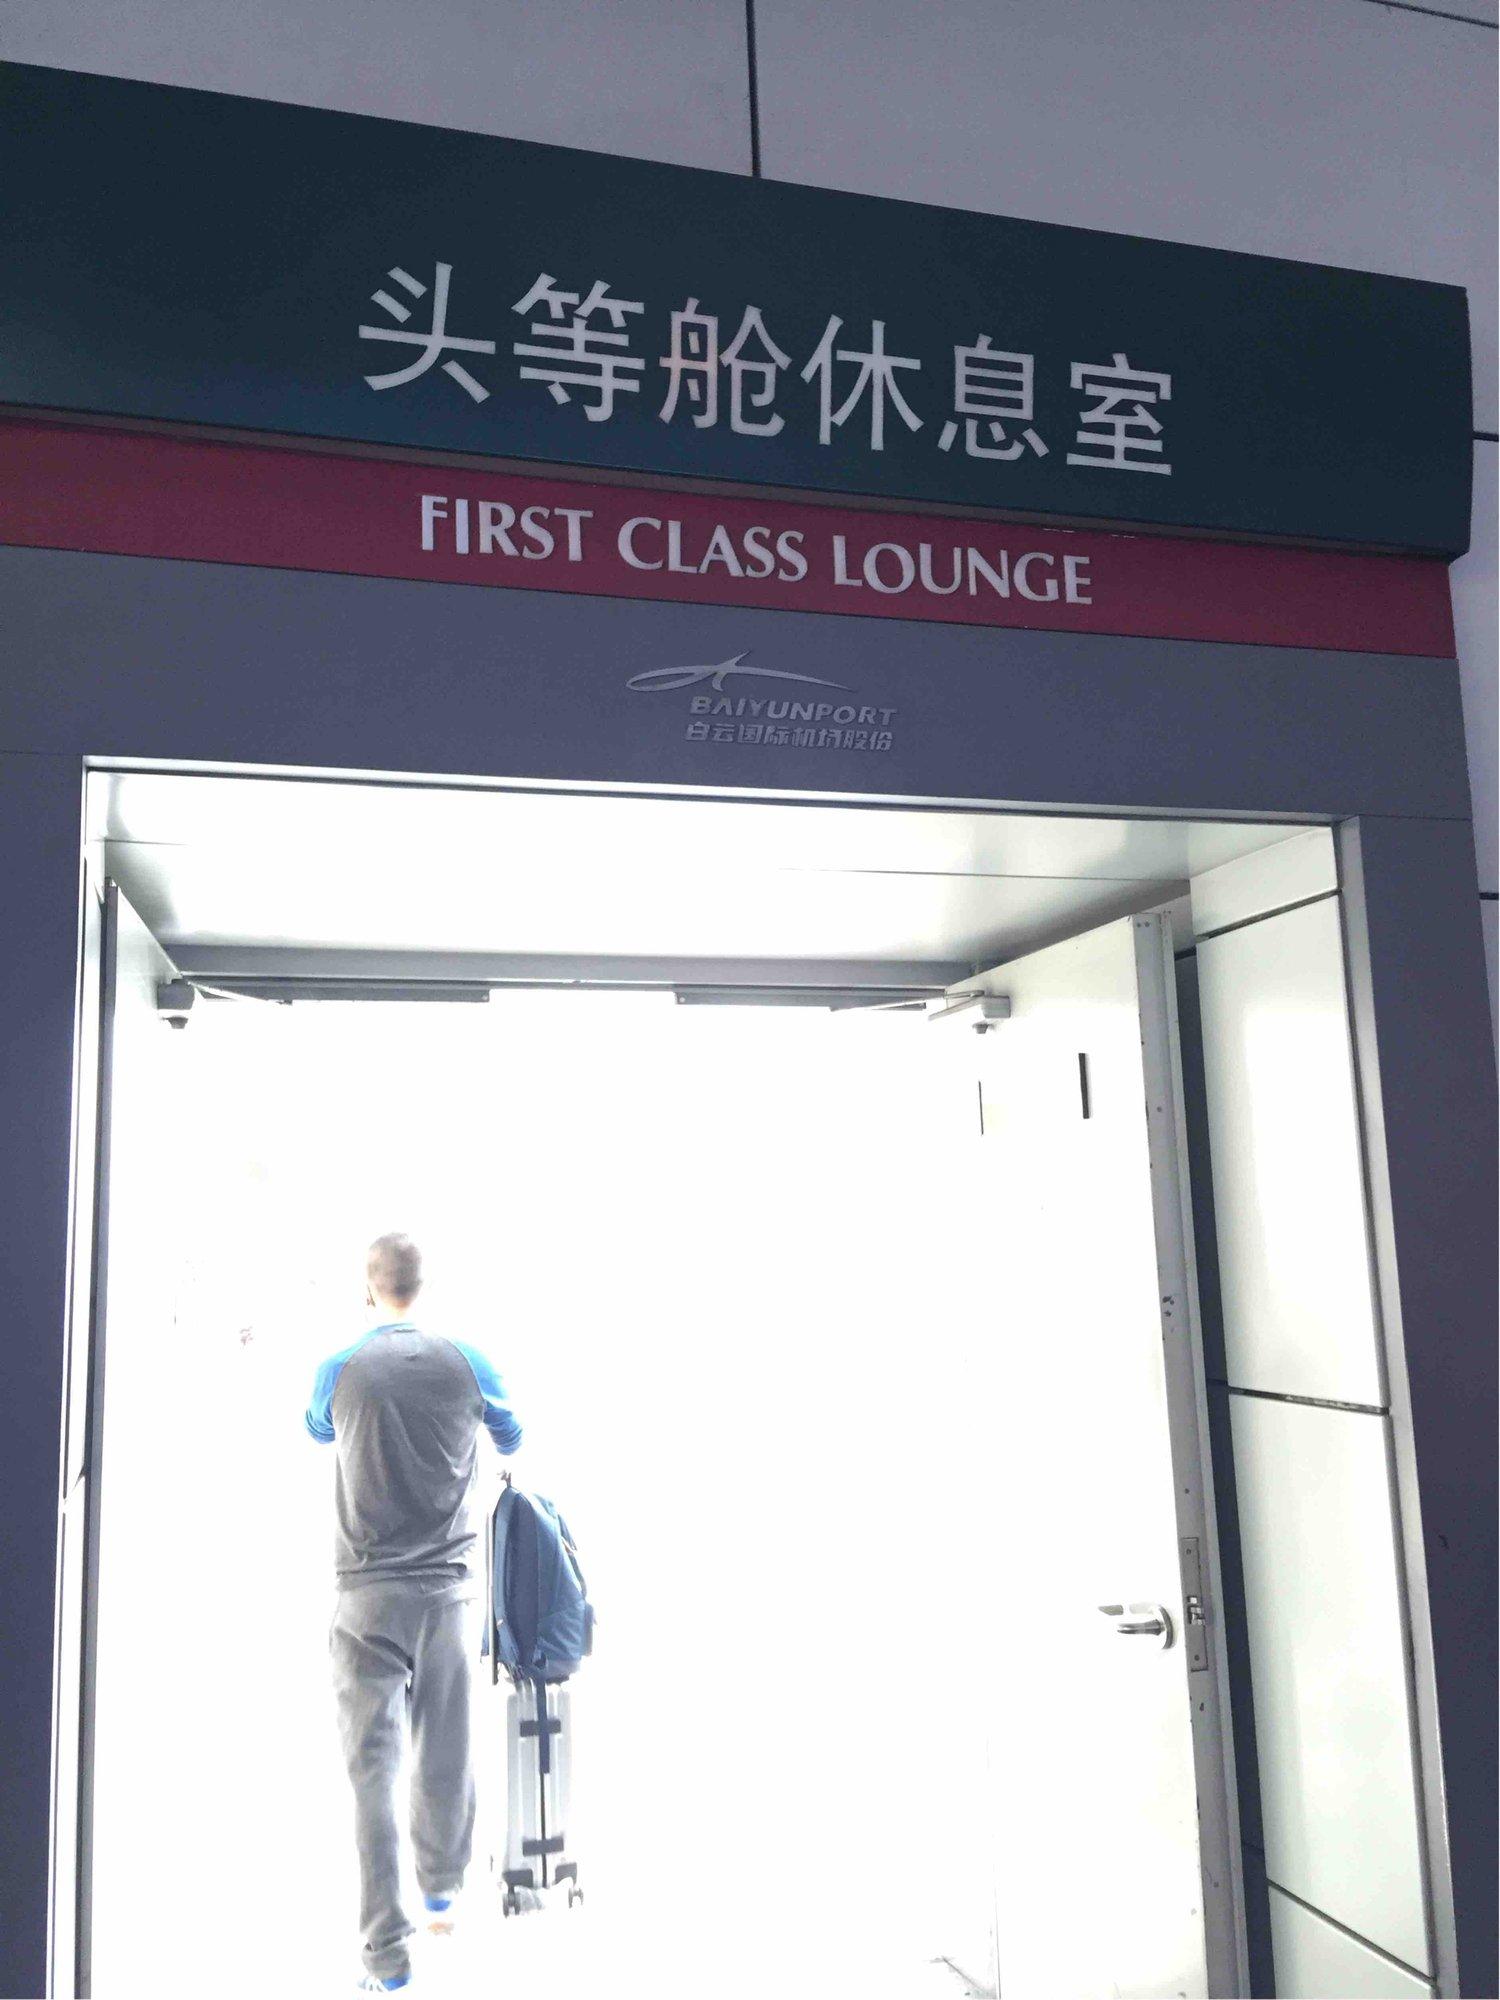 Baiyun Airport First Class Lounge (Closed For Renovation) image 9 of 10